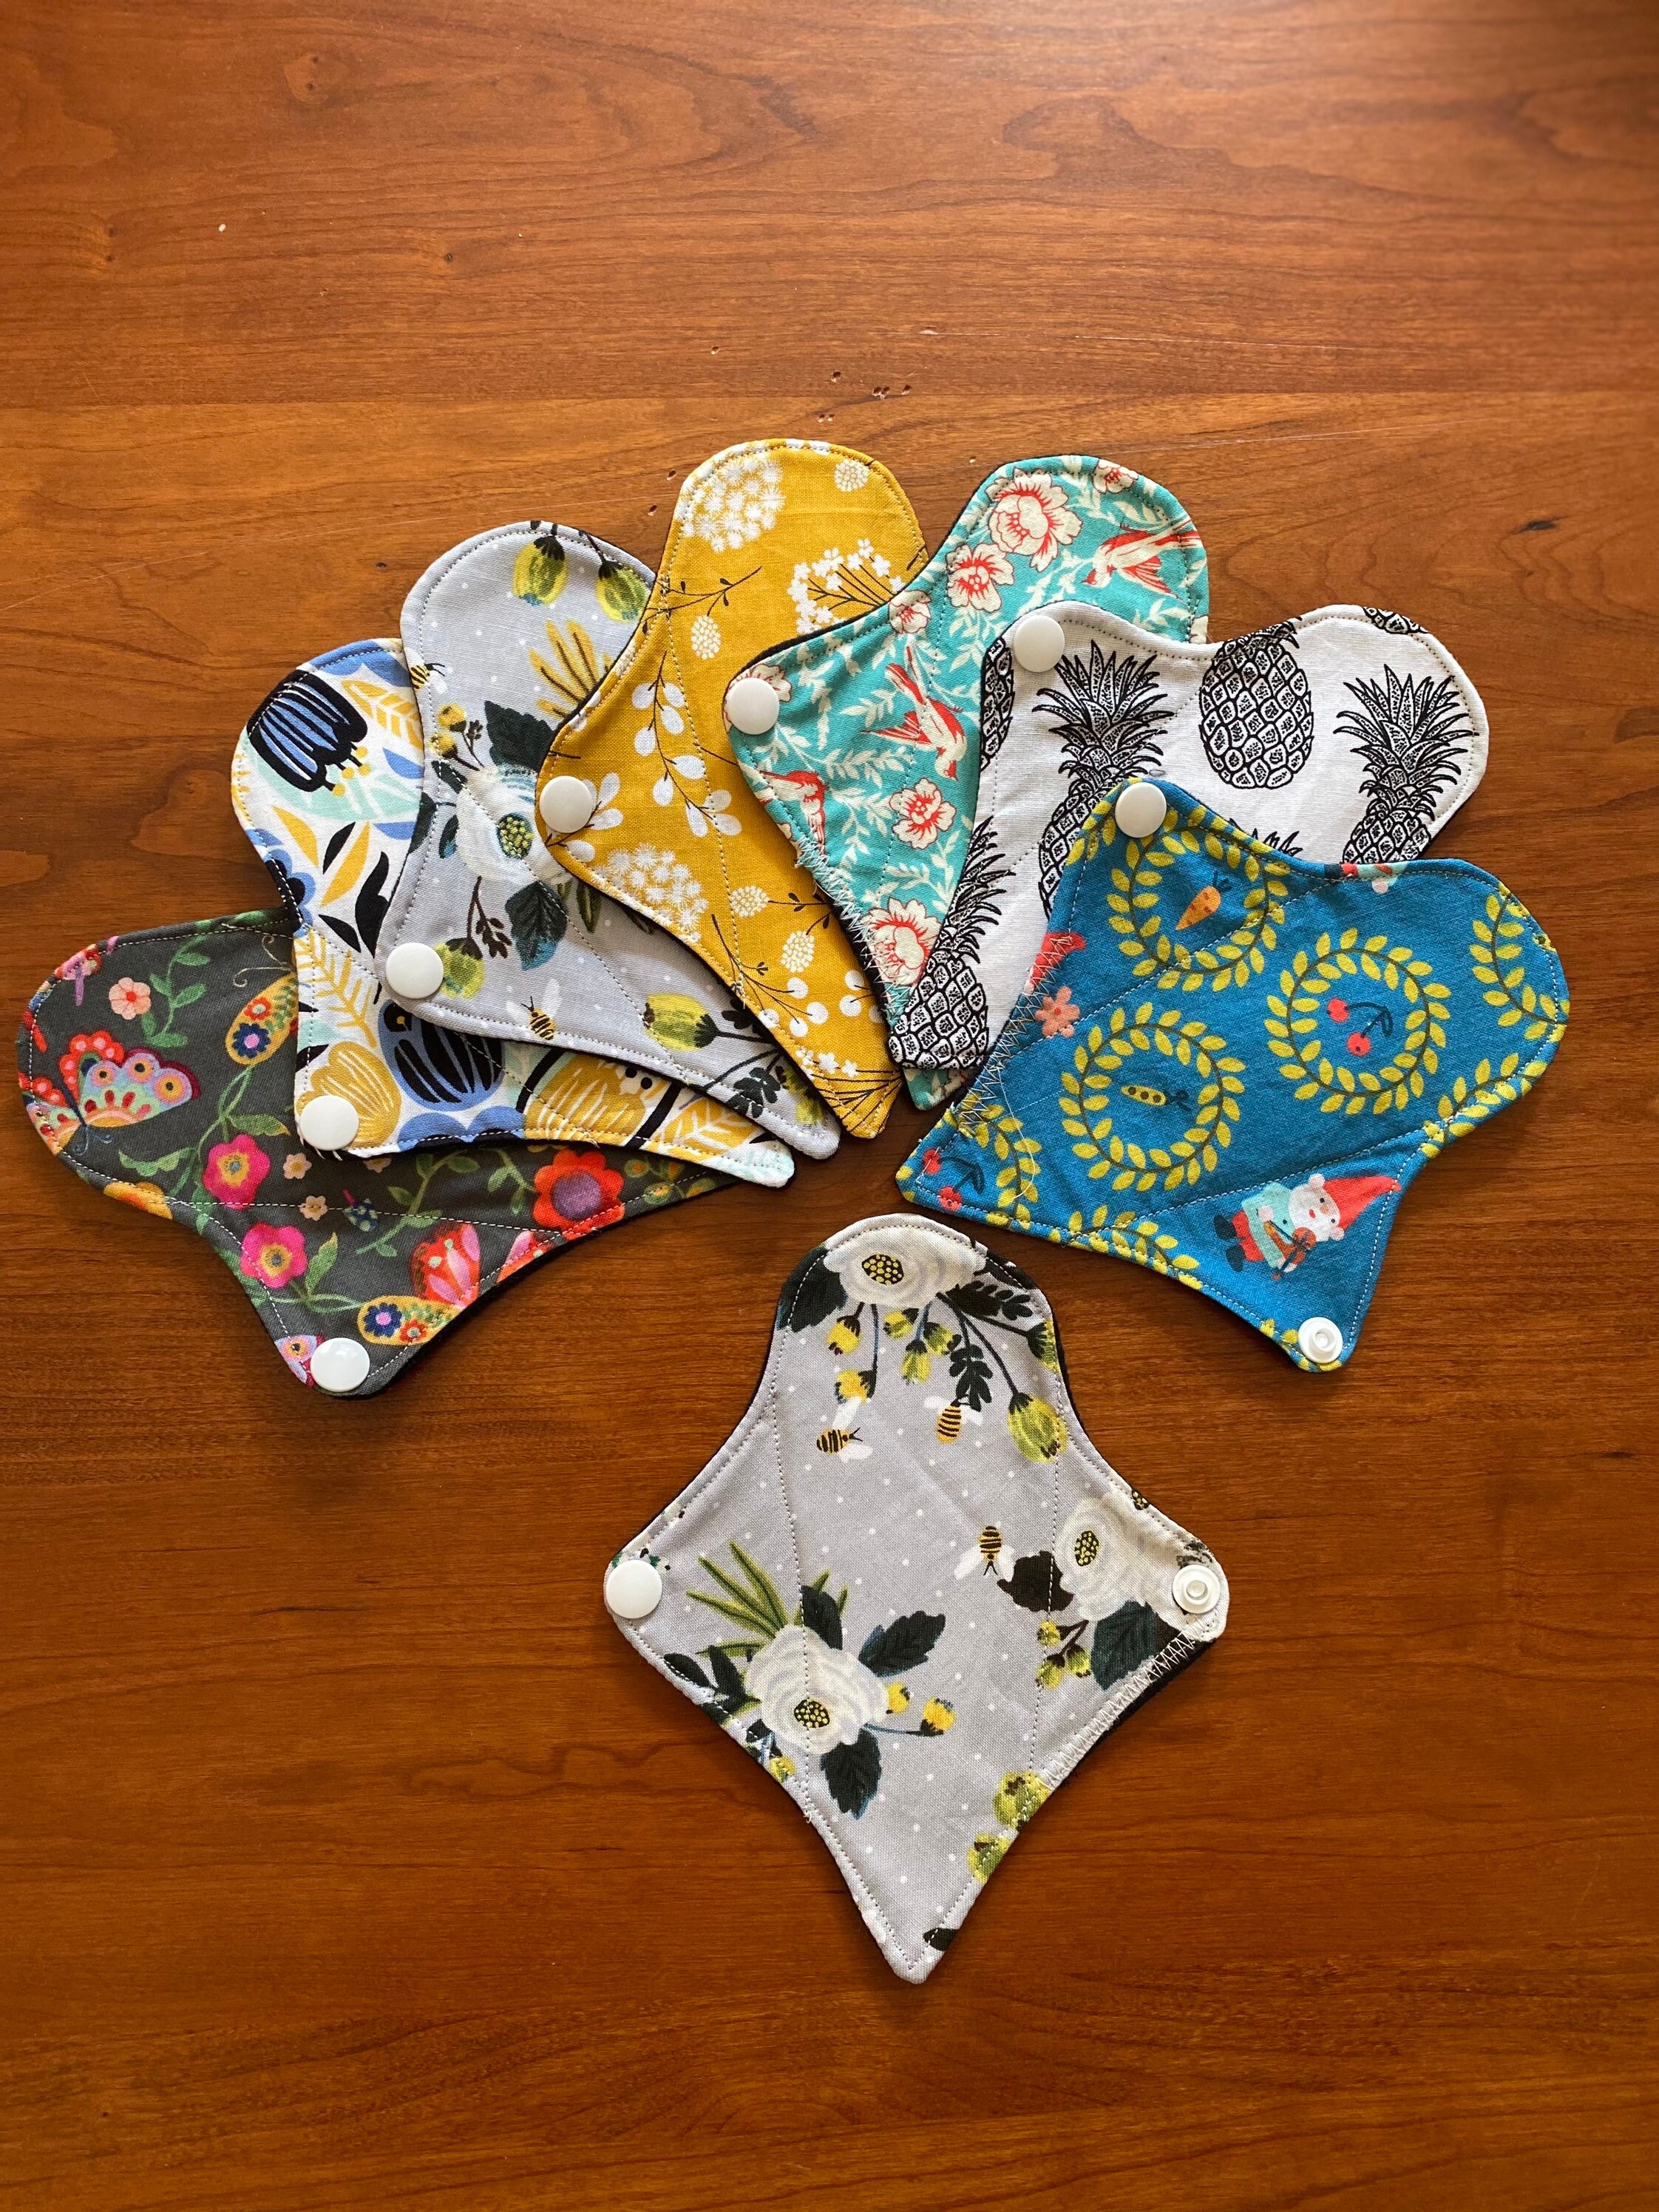 Thong Cloth Panty Liners - Super Soft Reusable Cotton Flannel Panty Liners  in 6, 7, 8 in a Variety of Cute Prints